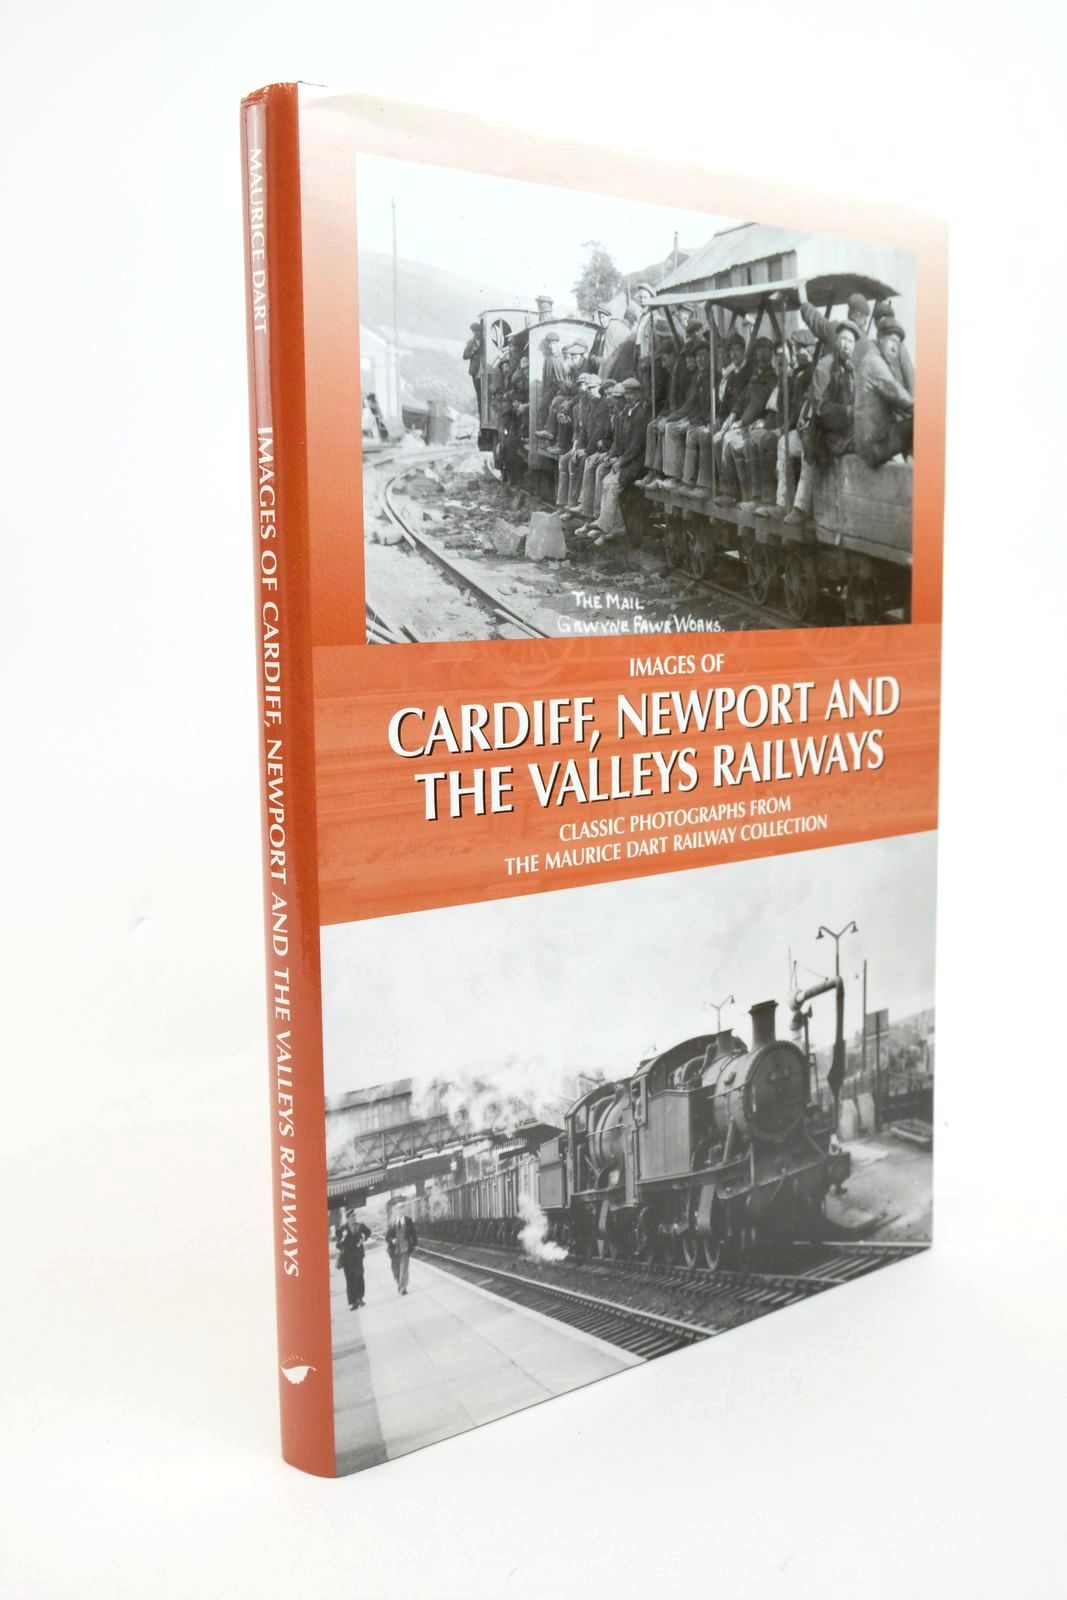 Photo of IMAGES OF CARDIFF, NEWPORT AND THE VALLEYS RAILWAYS written by Dart, Maurice published by Halsgrove (STOCK CODE: 1322813)  for sale by Stella & Rose's Books